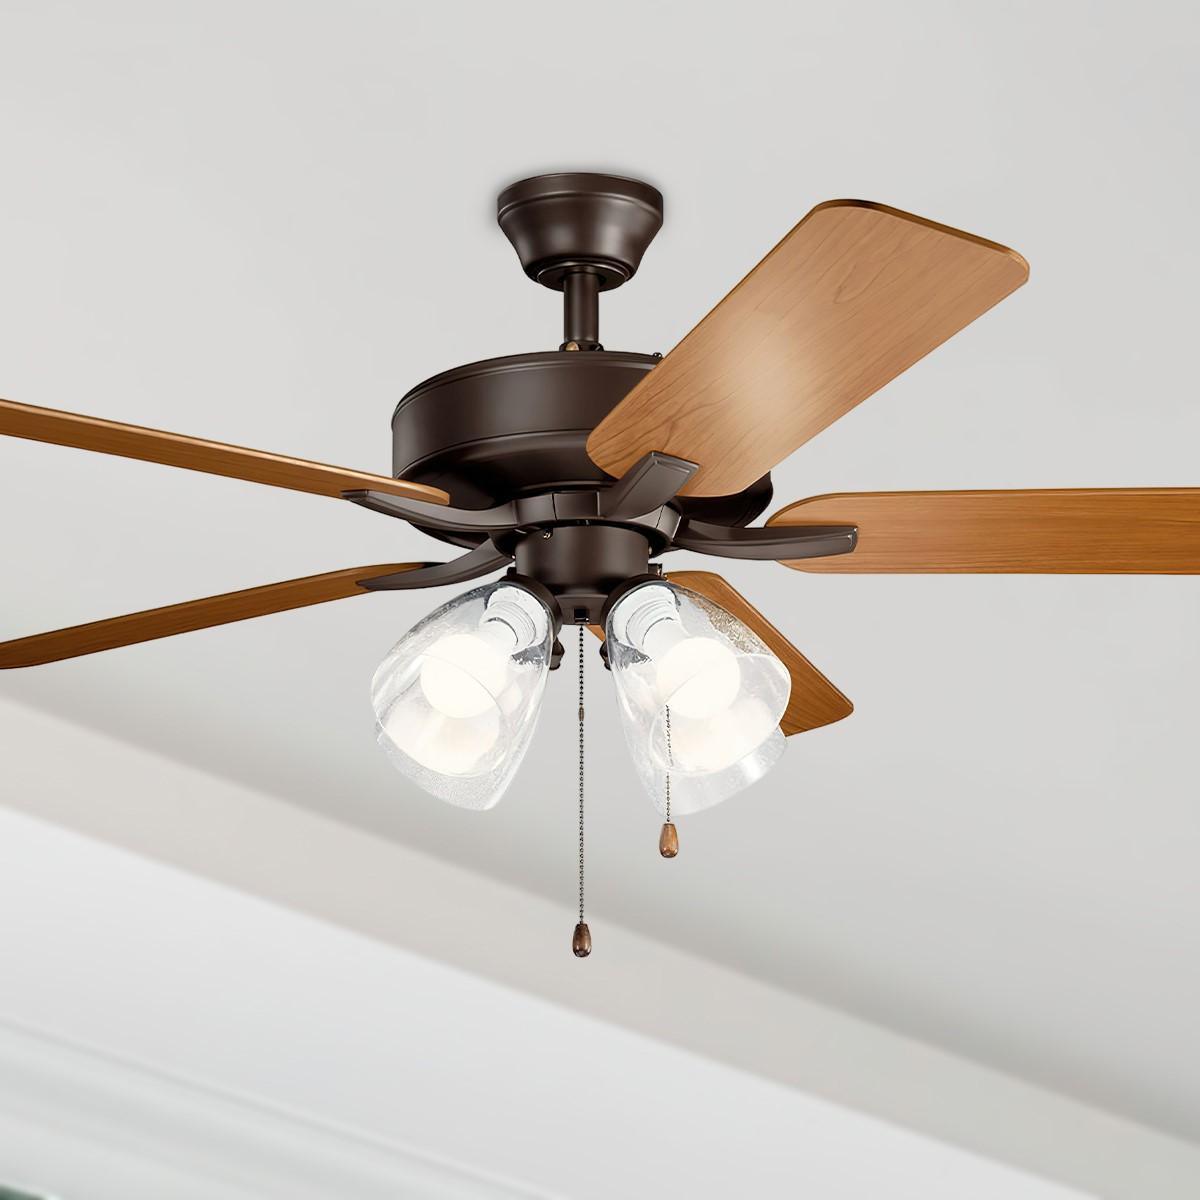 Basics Pro 52 Inch Ceiling Fan With Light, Clear Glass, Pull Chain Included